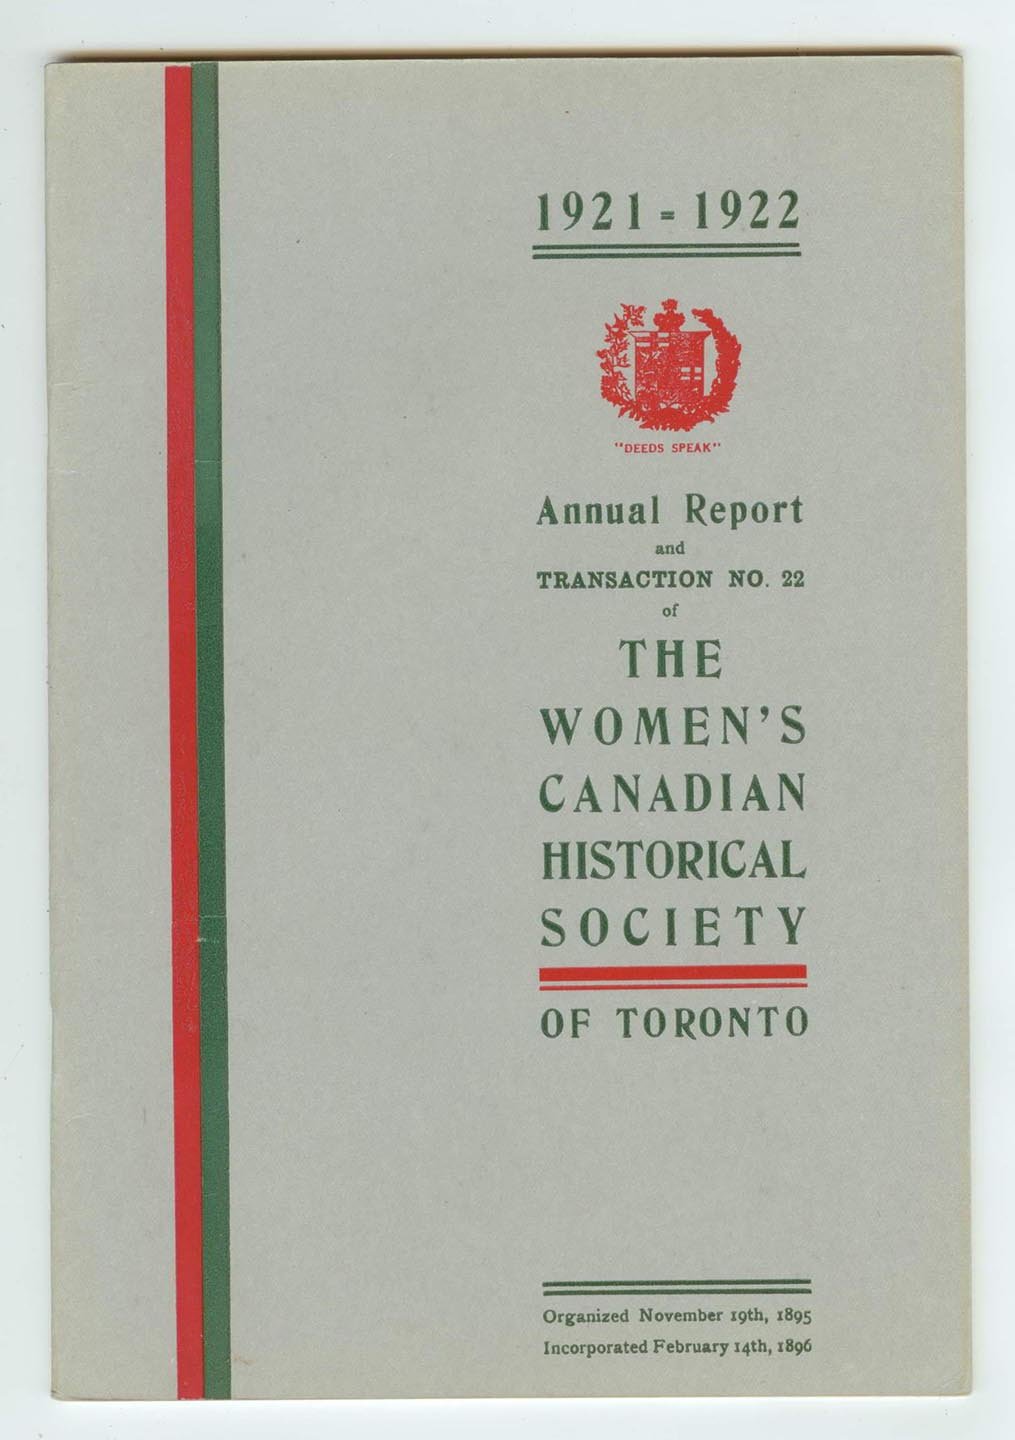 Annual Report and Transaction No. 22 of The Women's Canadian Historical Society of Toronto 1921-1922